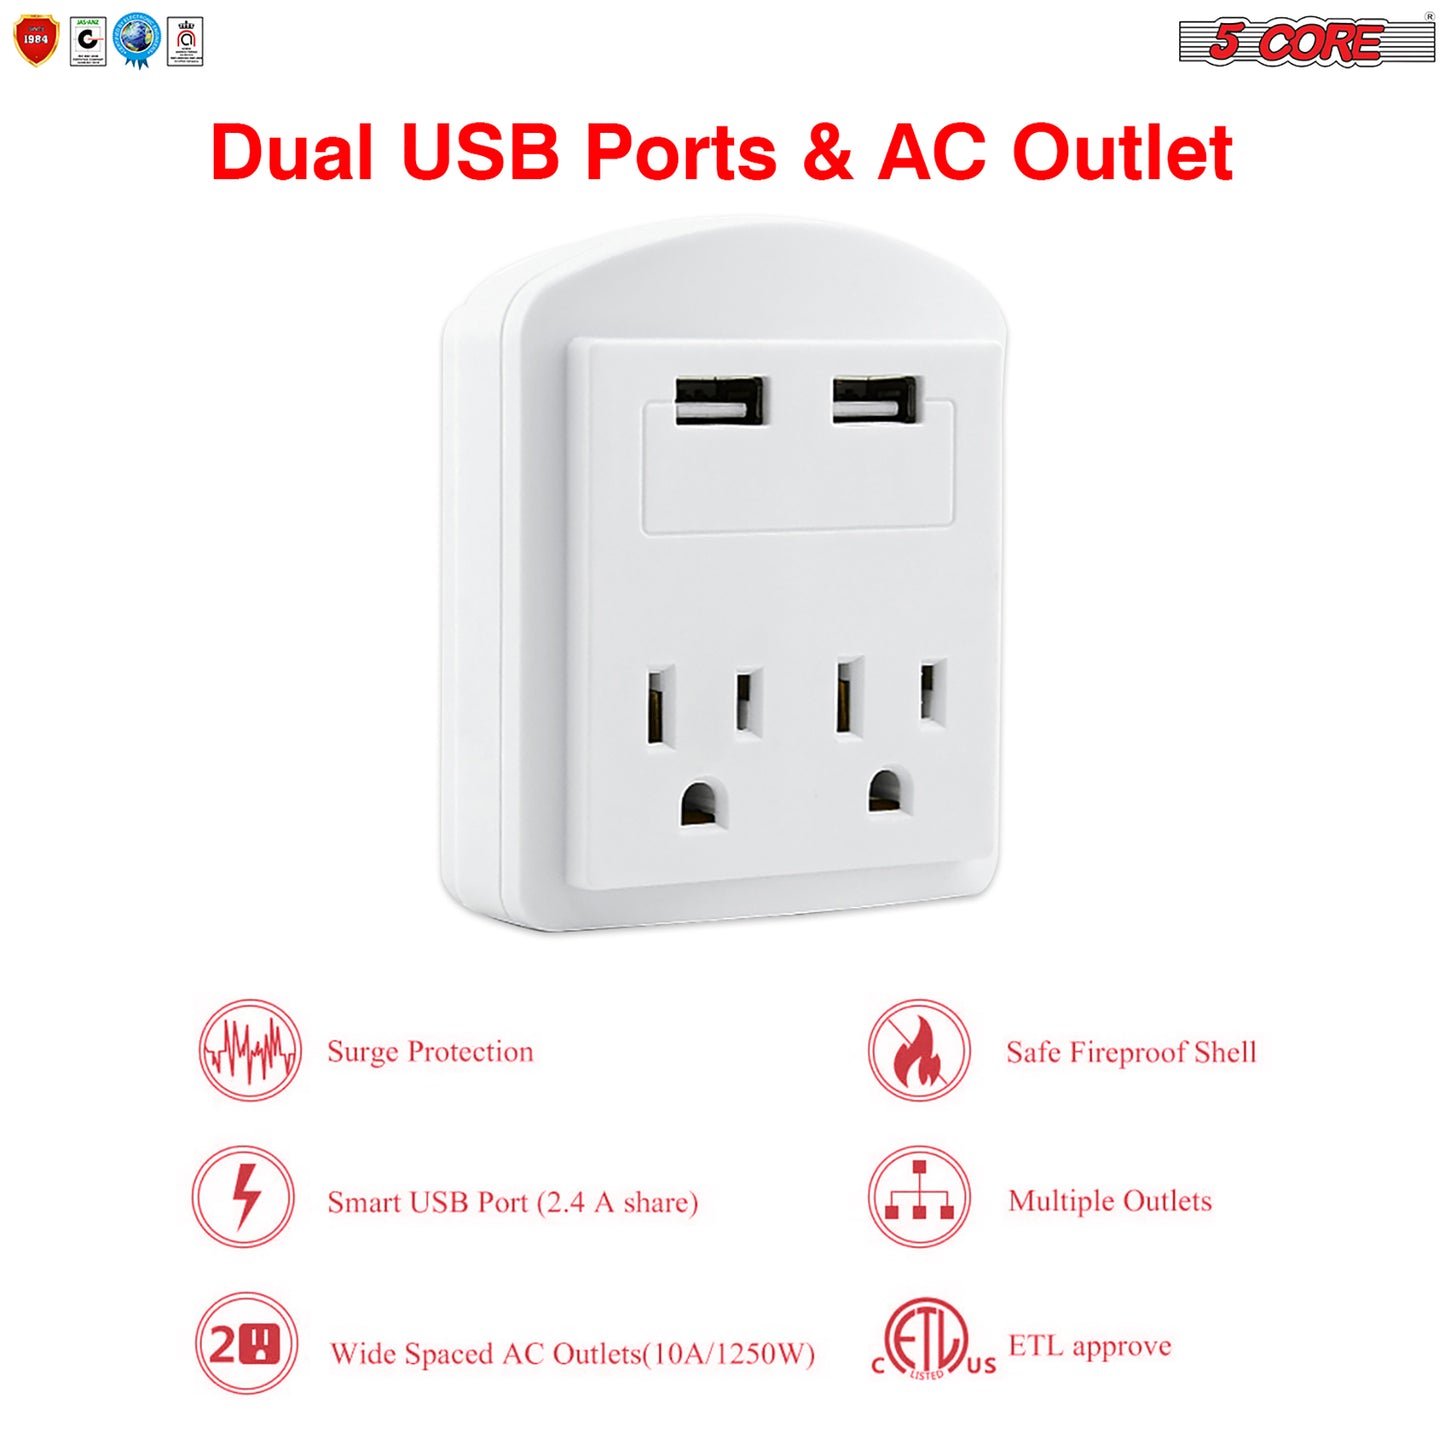 USB Wall Charger White with Surge Protector | Charging Power Outlet with 2 USB Ports and 2 AC Plug Expanders | Safe Wall Adapter for Travel, Home, Office, Cruise Dorm Essentials- 2U2O-1